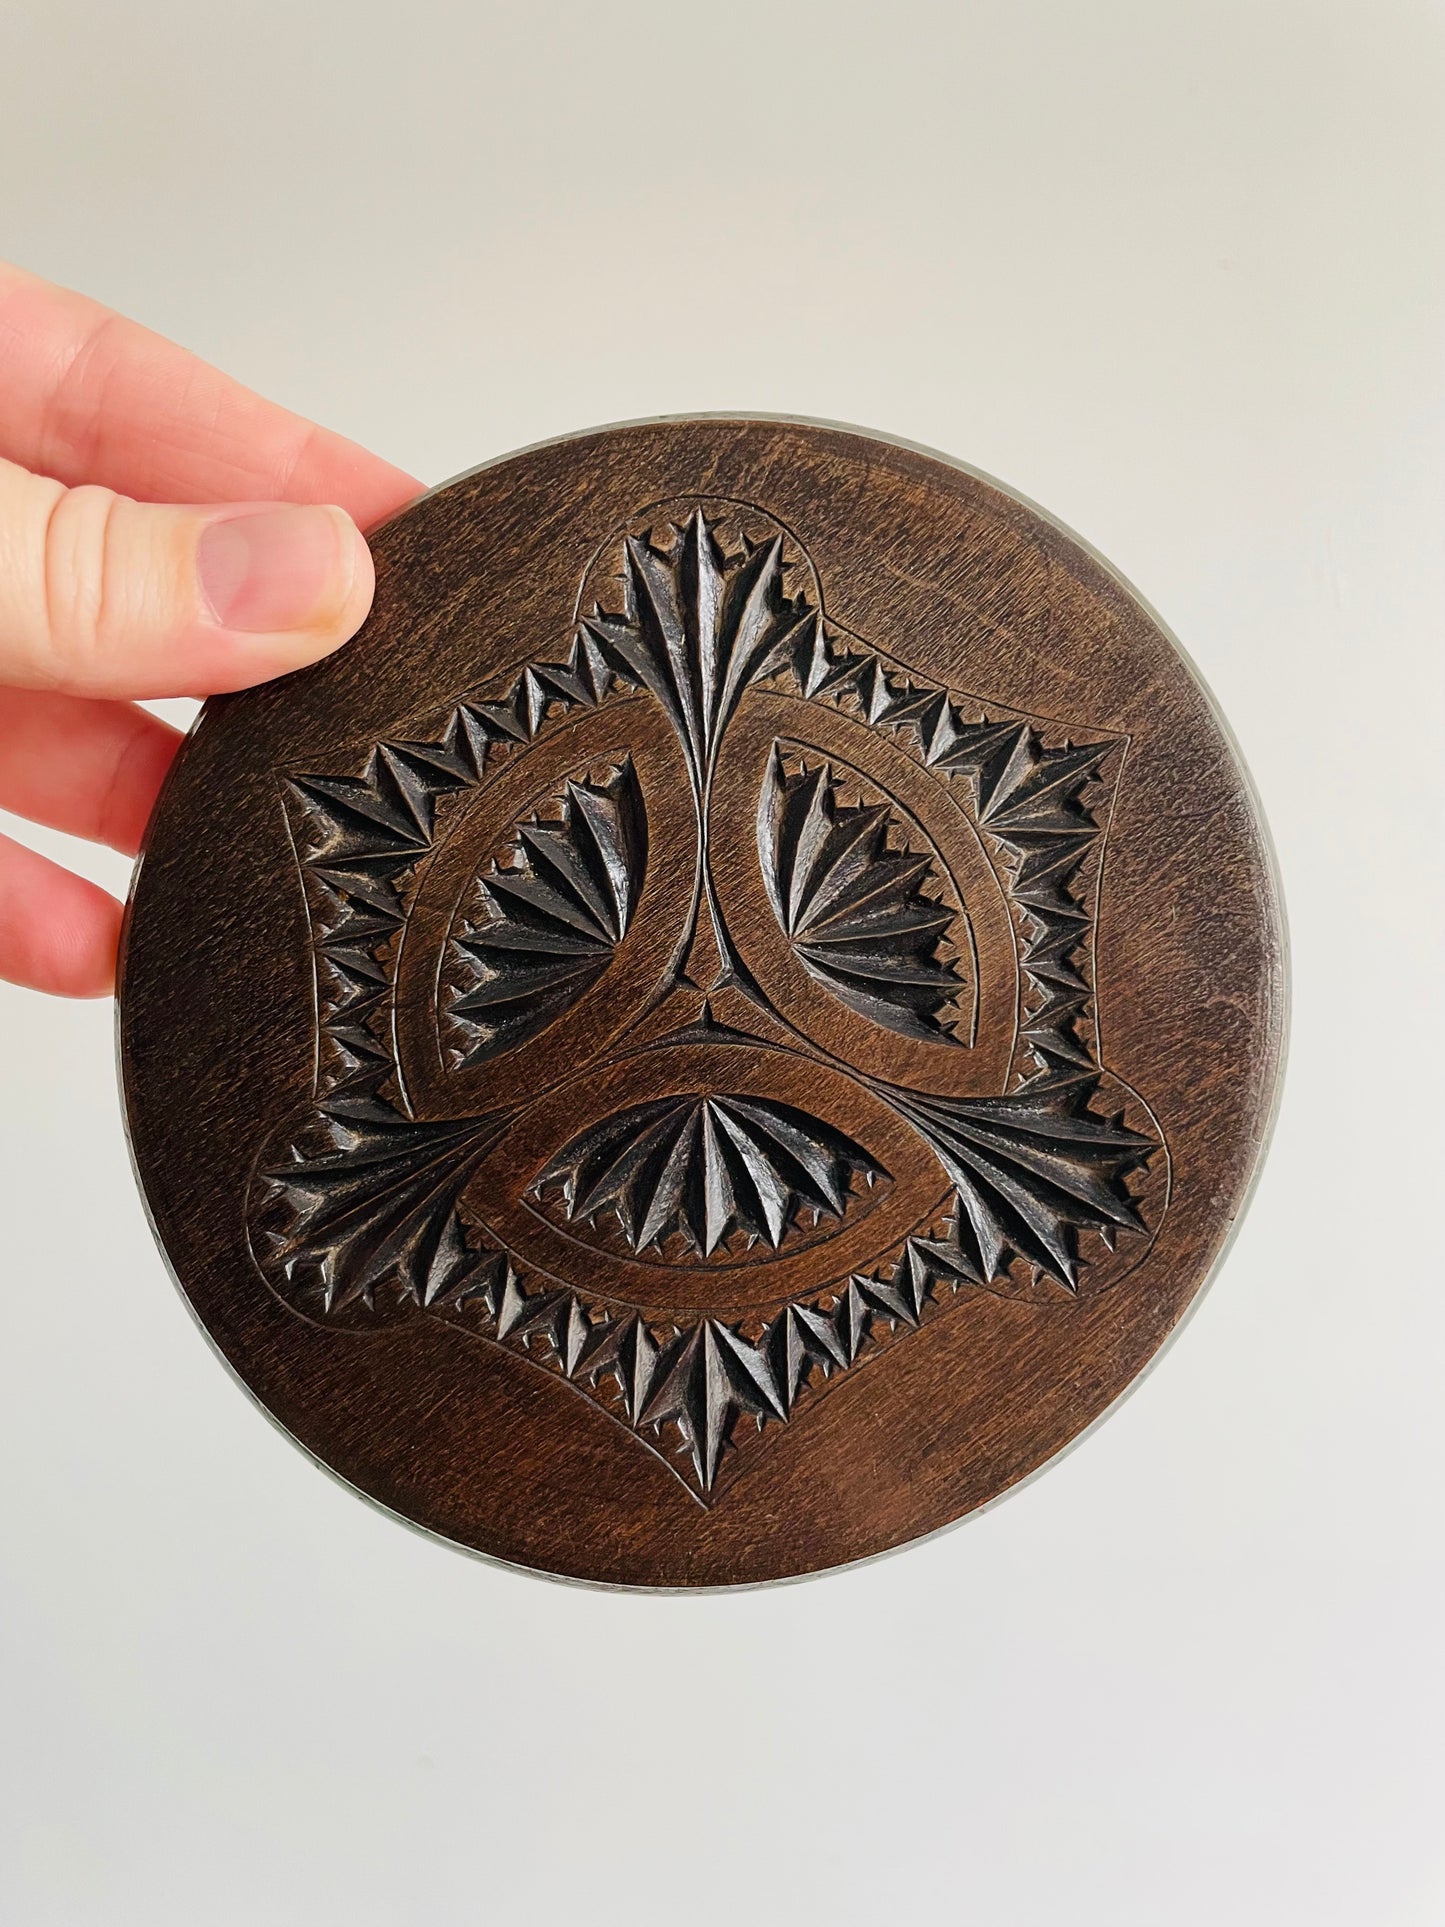 Miniature Wooden Plate with Intricately Carved Design